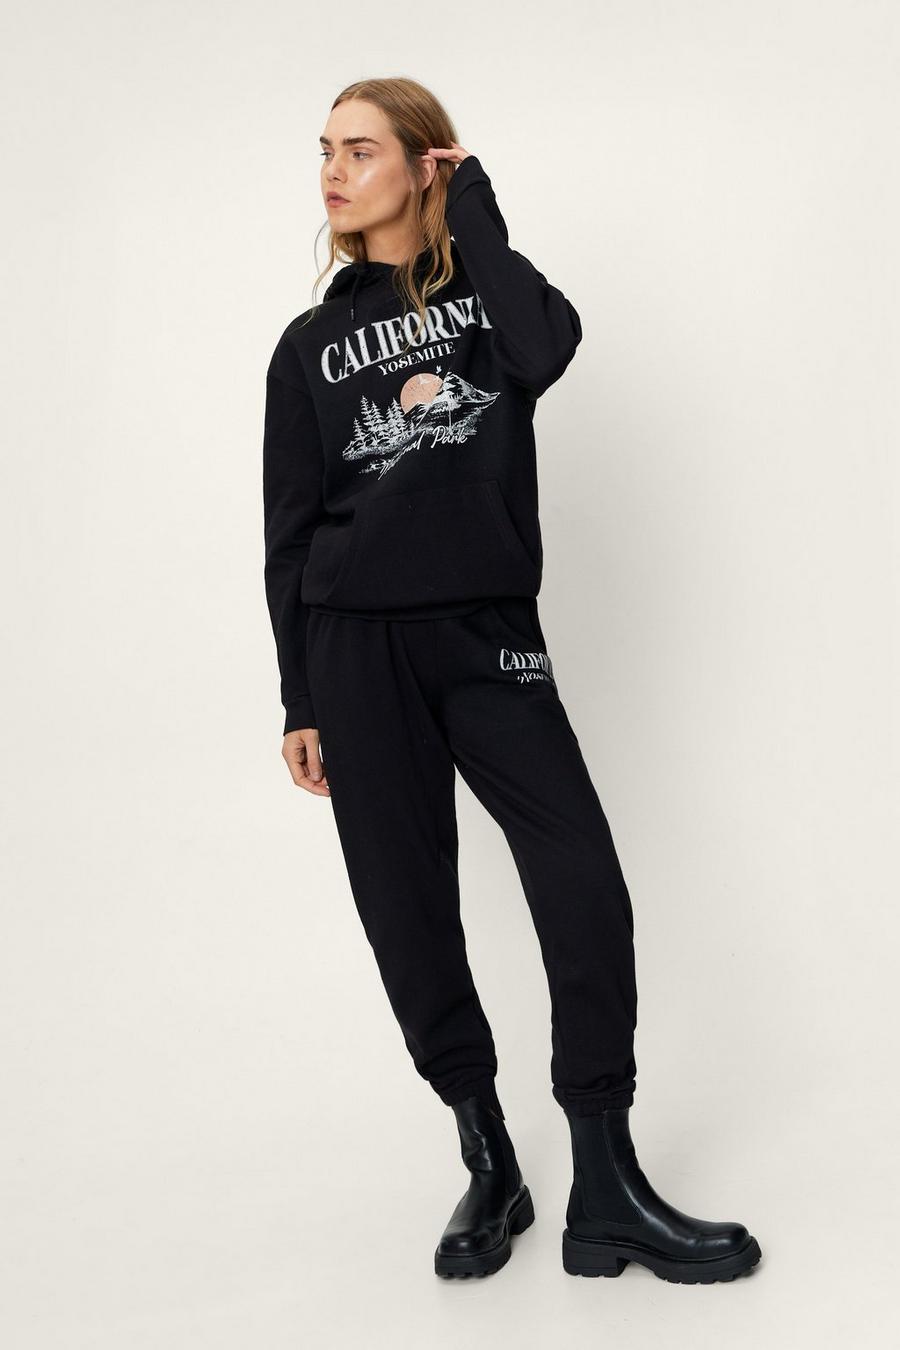 California Graphic Oversized Hoodie and Sweatpants Set